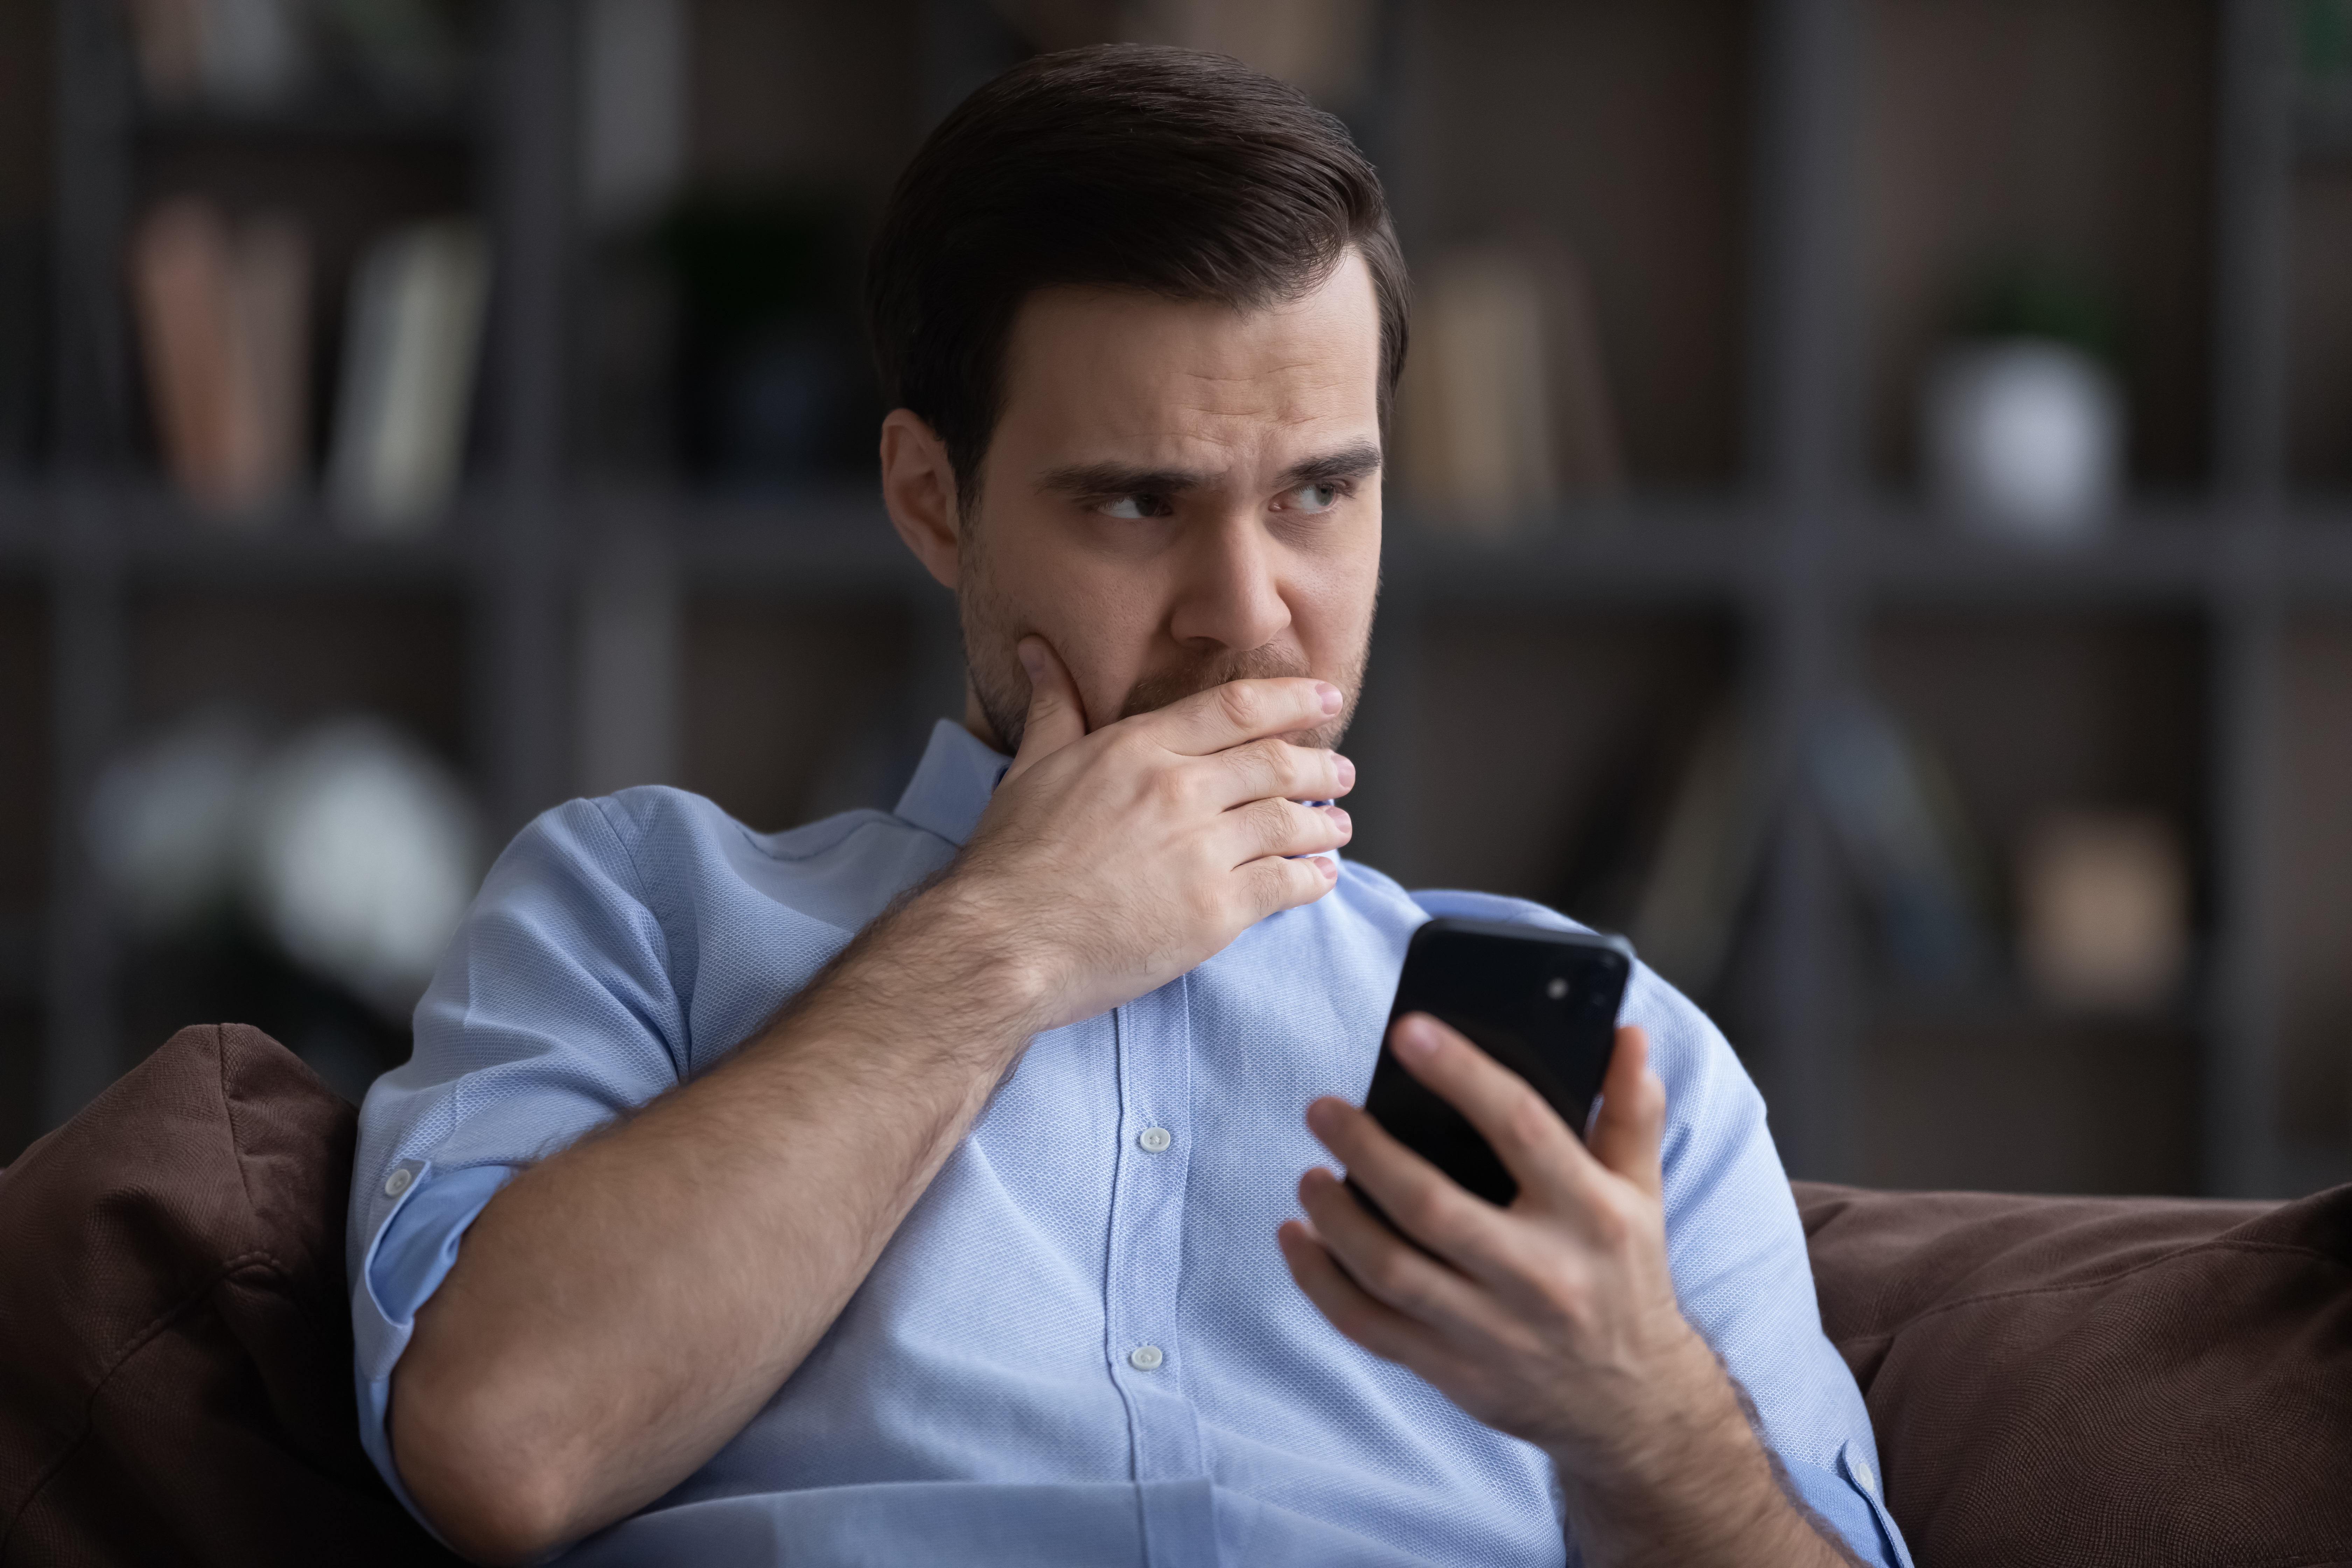 Distressed man feeling doubtful about something while holding his phone | Source: Shutterstock